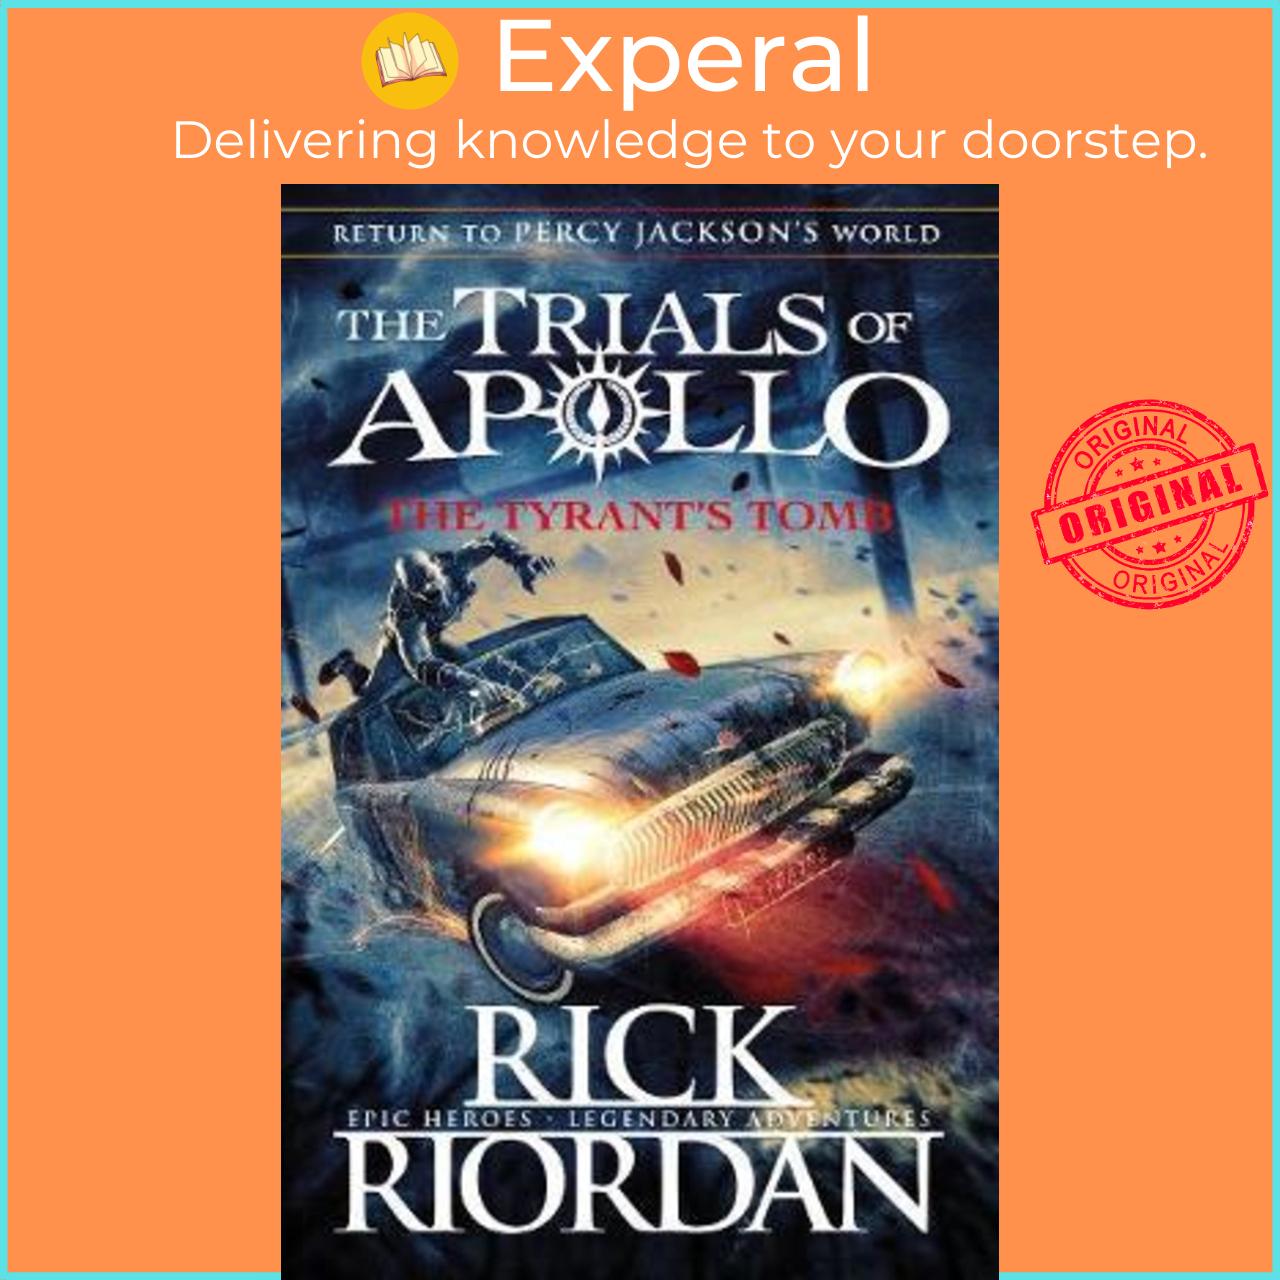 Sách - The Tyrant's Tomb (The Trials of Apollo Book 4) by Rick Riordan (UK edition, paperback)